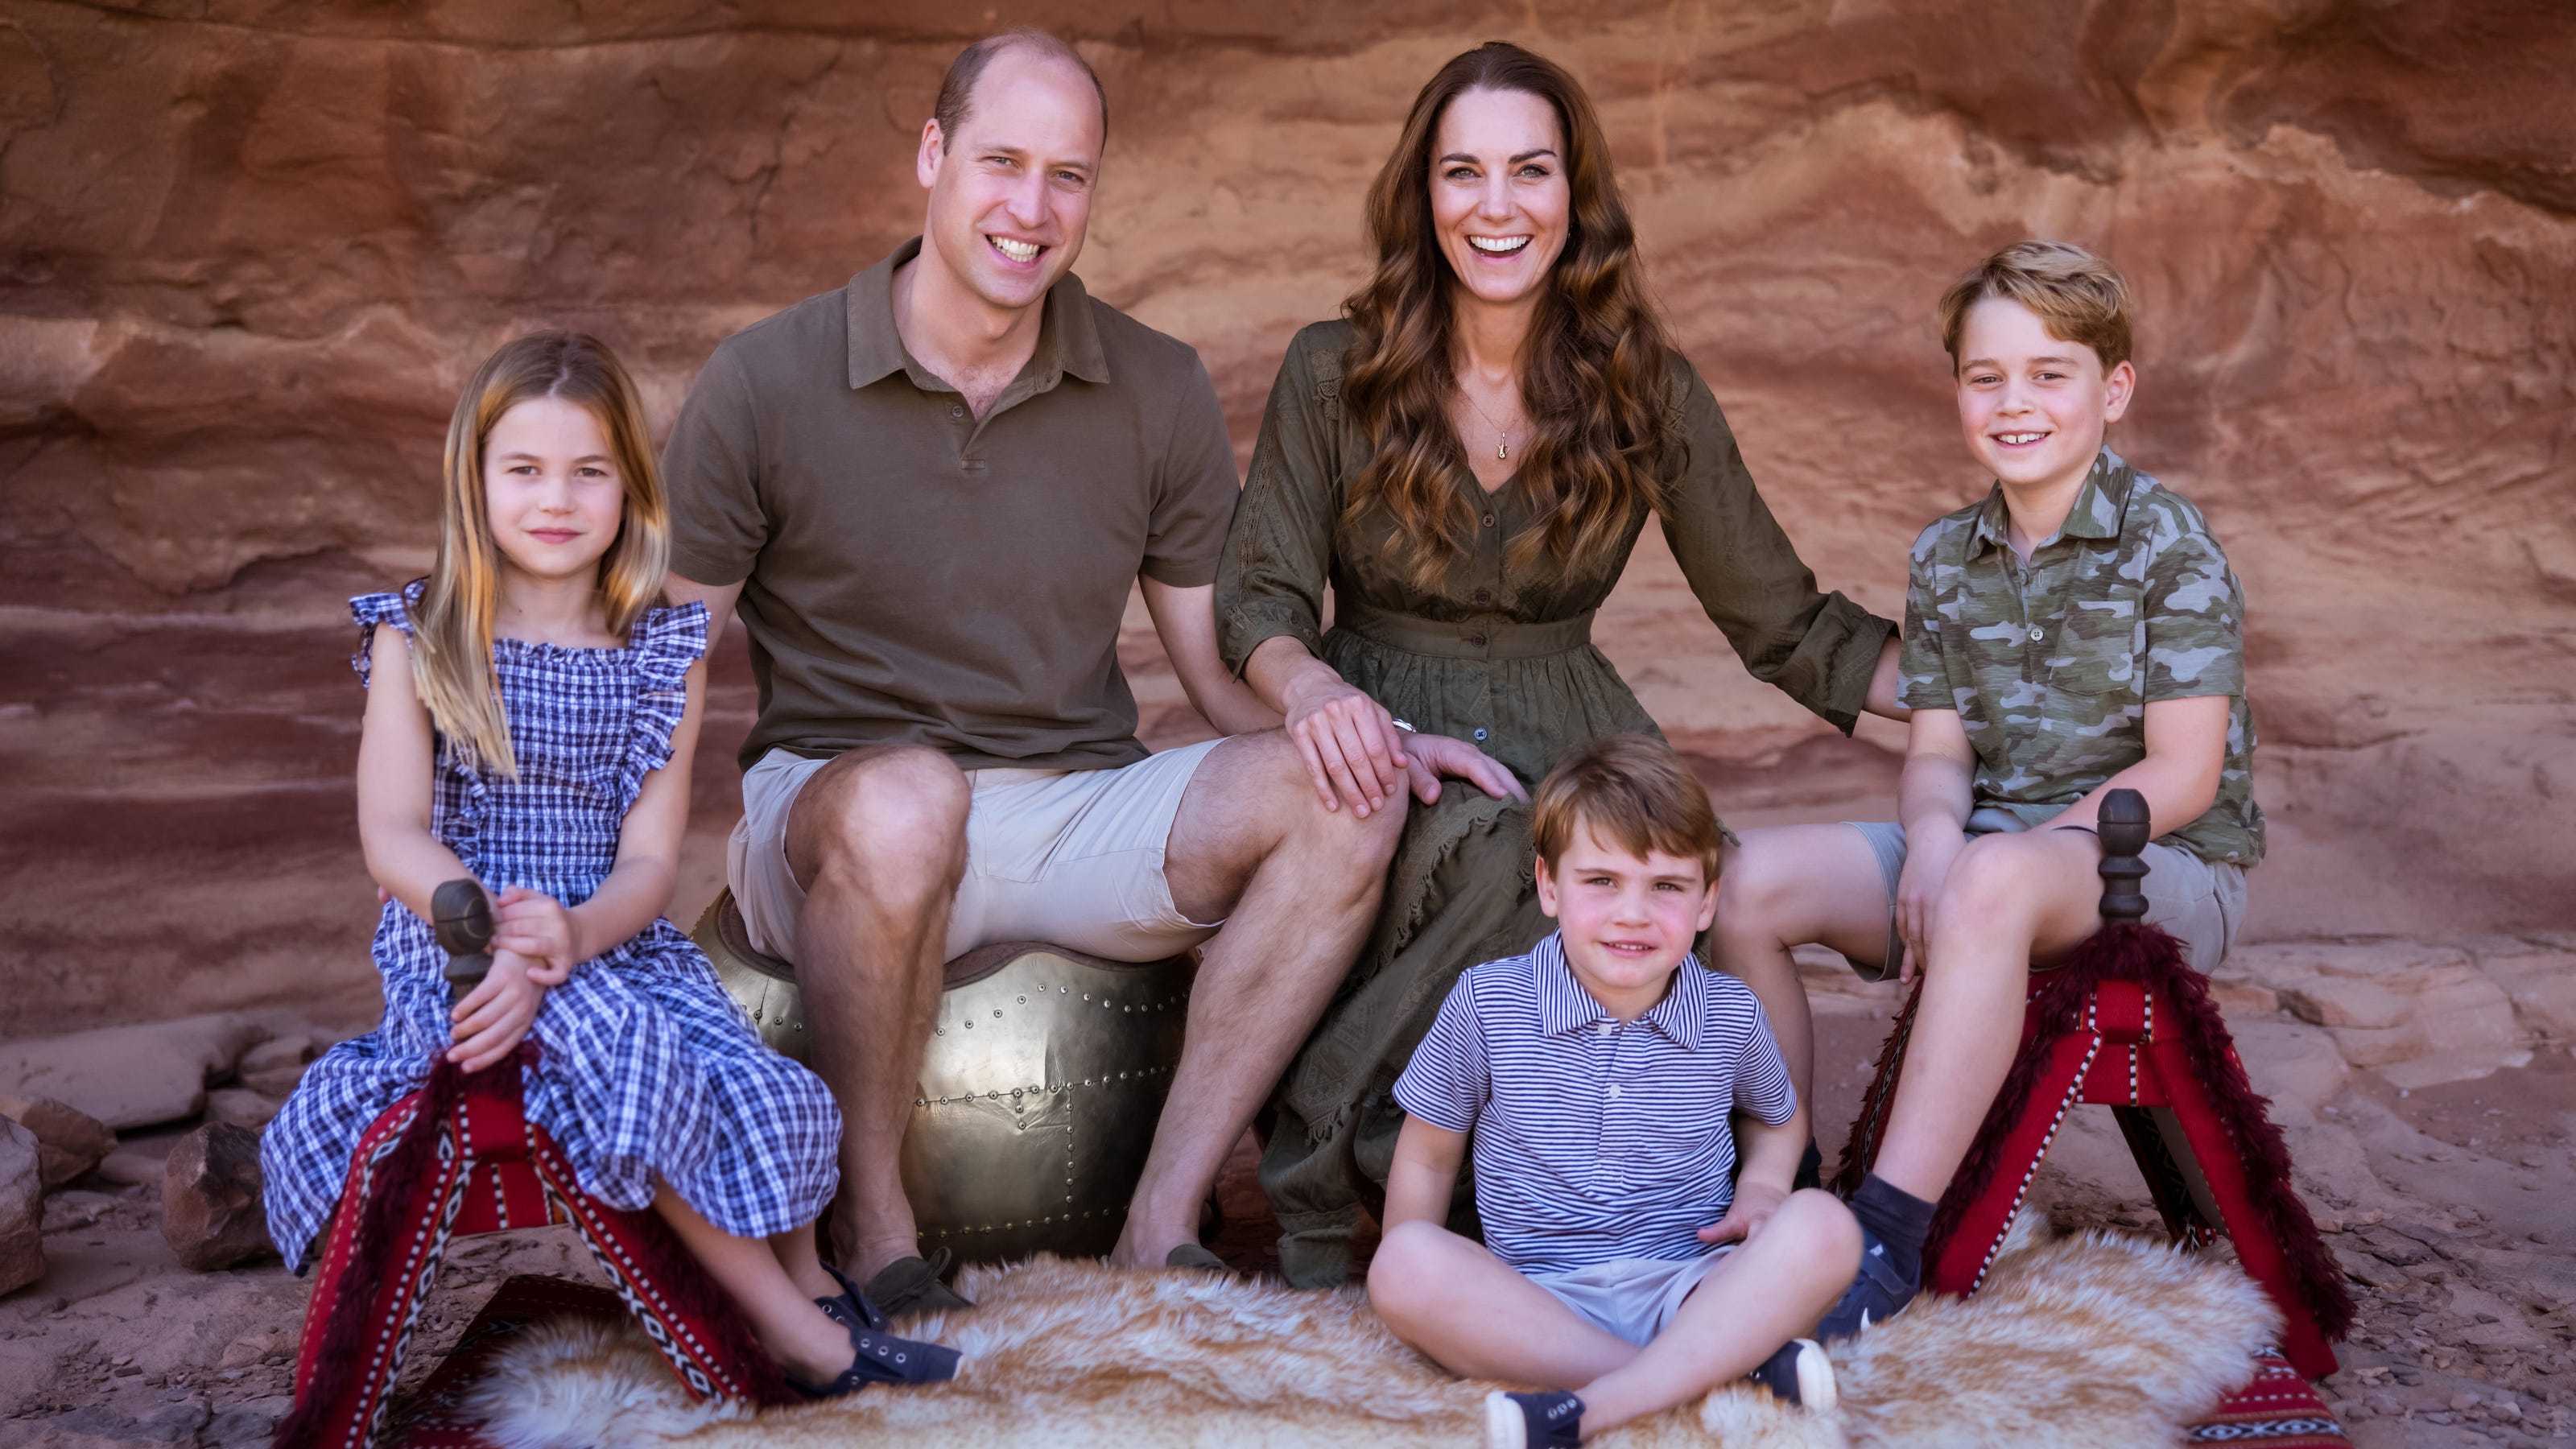 Prince William, Duchess Kate Christmas card See new photo with kids